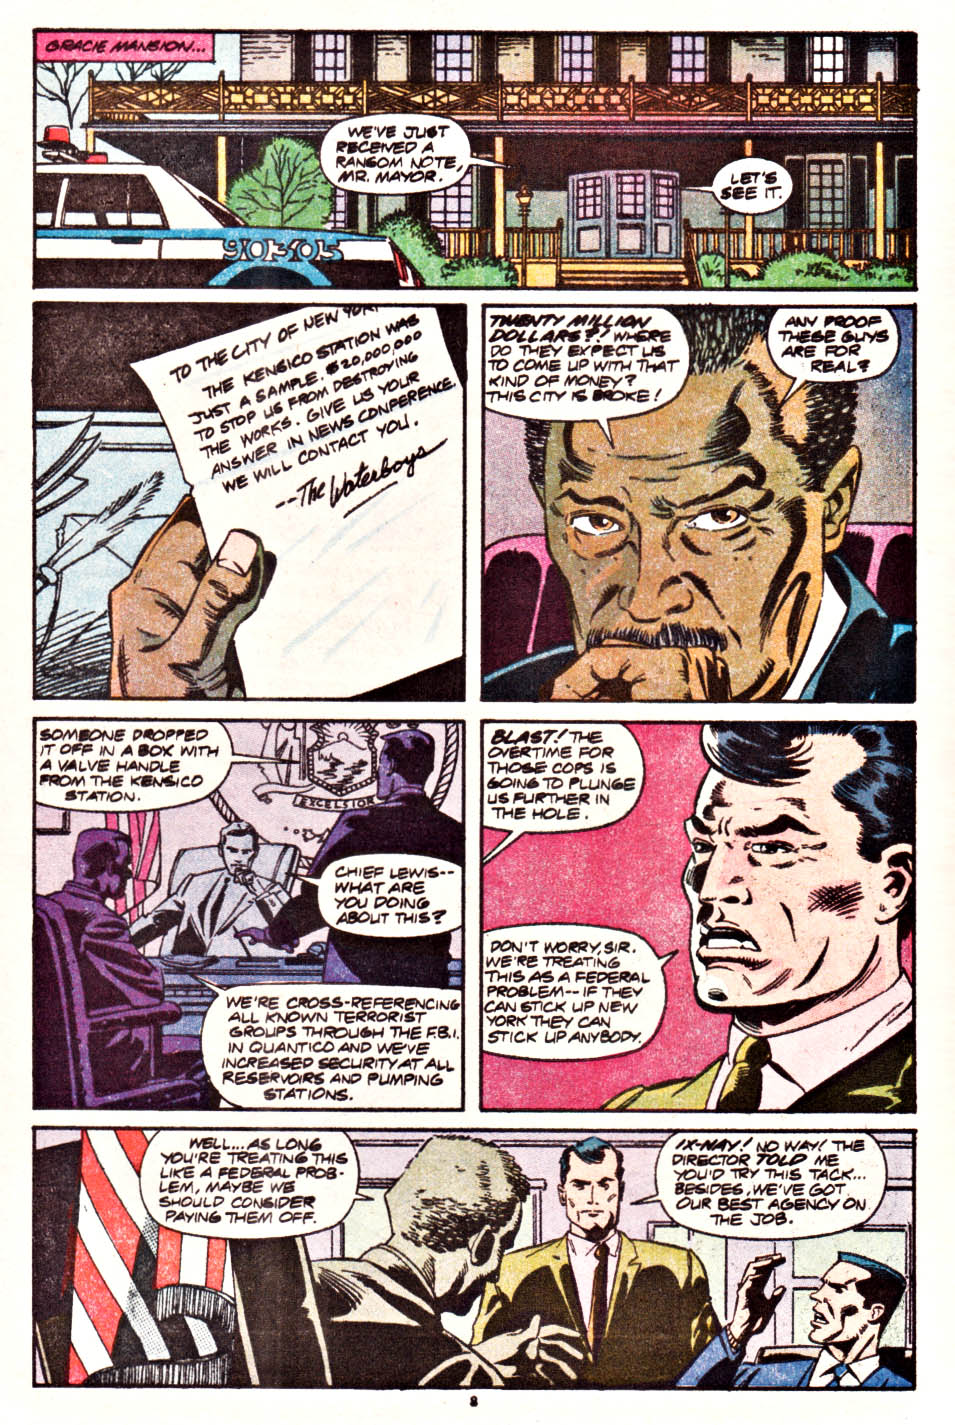 The Punisher (1987) issue 41 - Should a Gentleman offer a Tiparillo to a Lady - Page 7